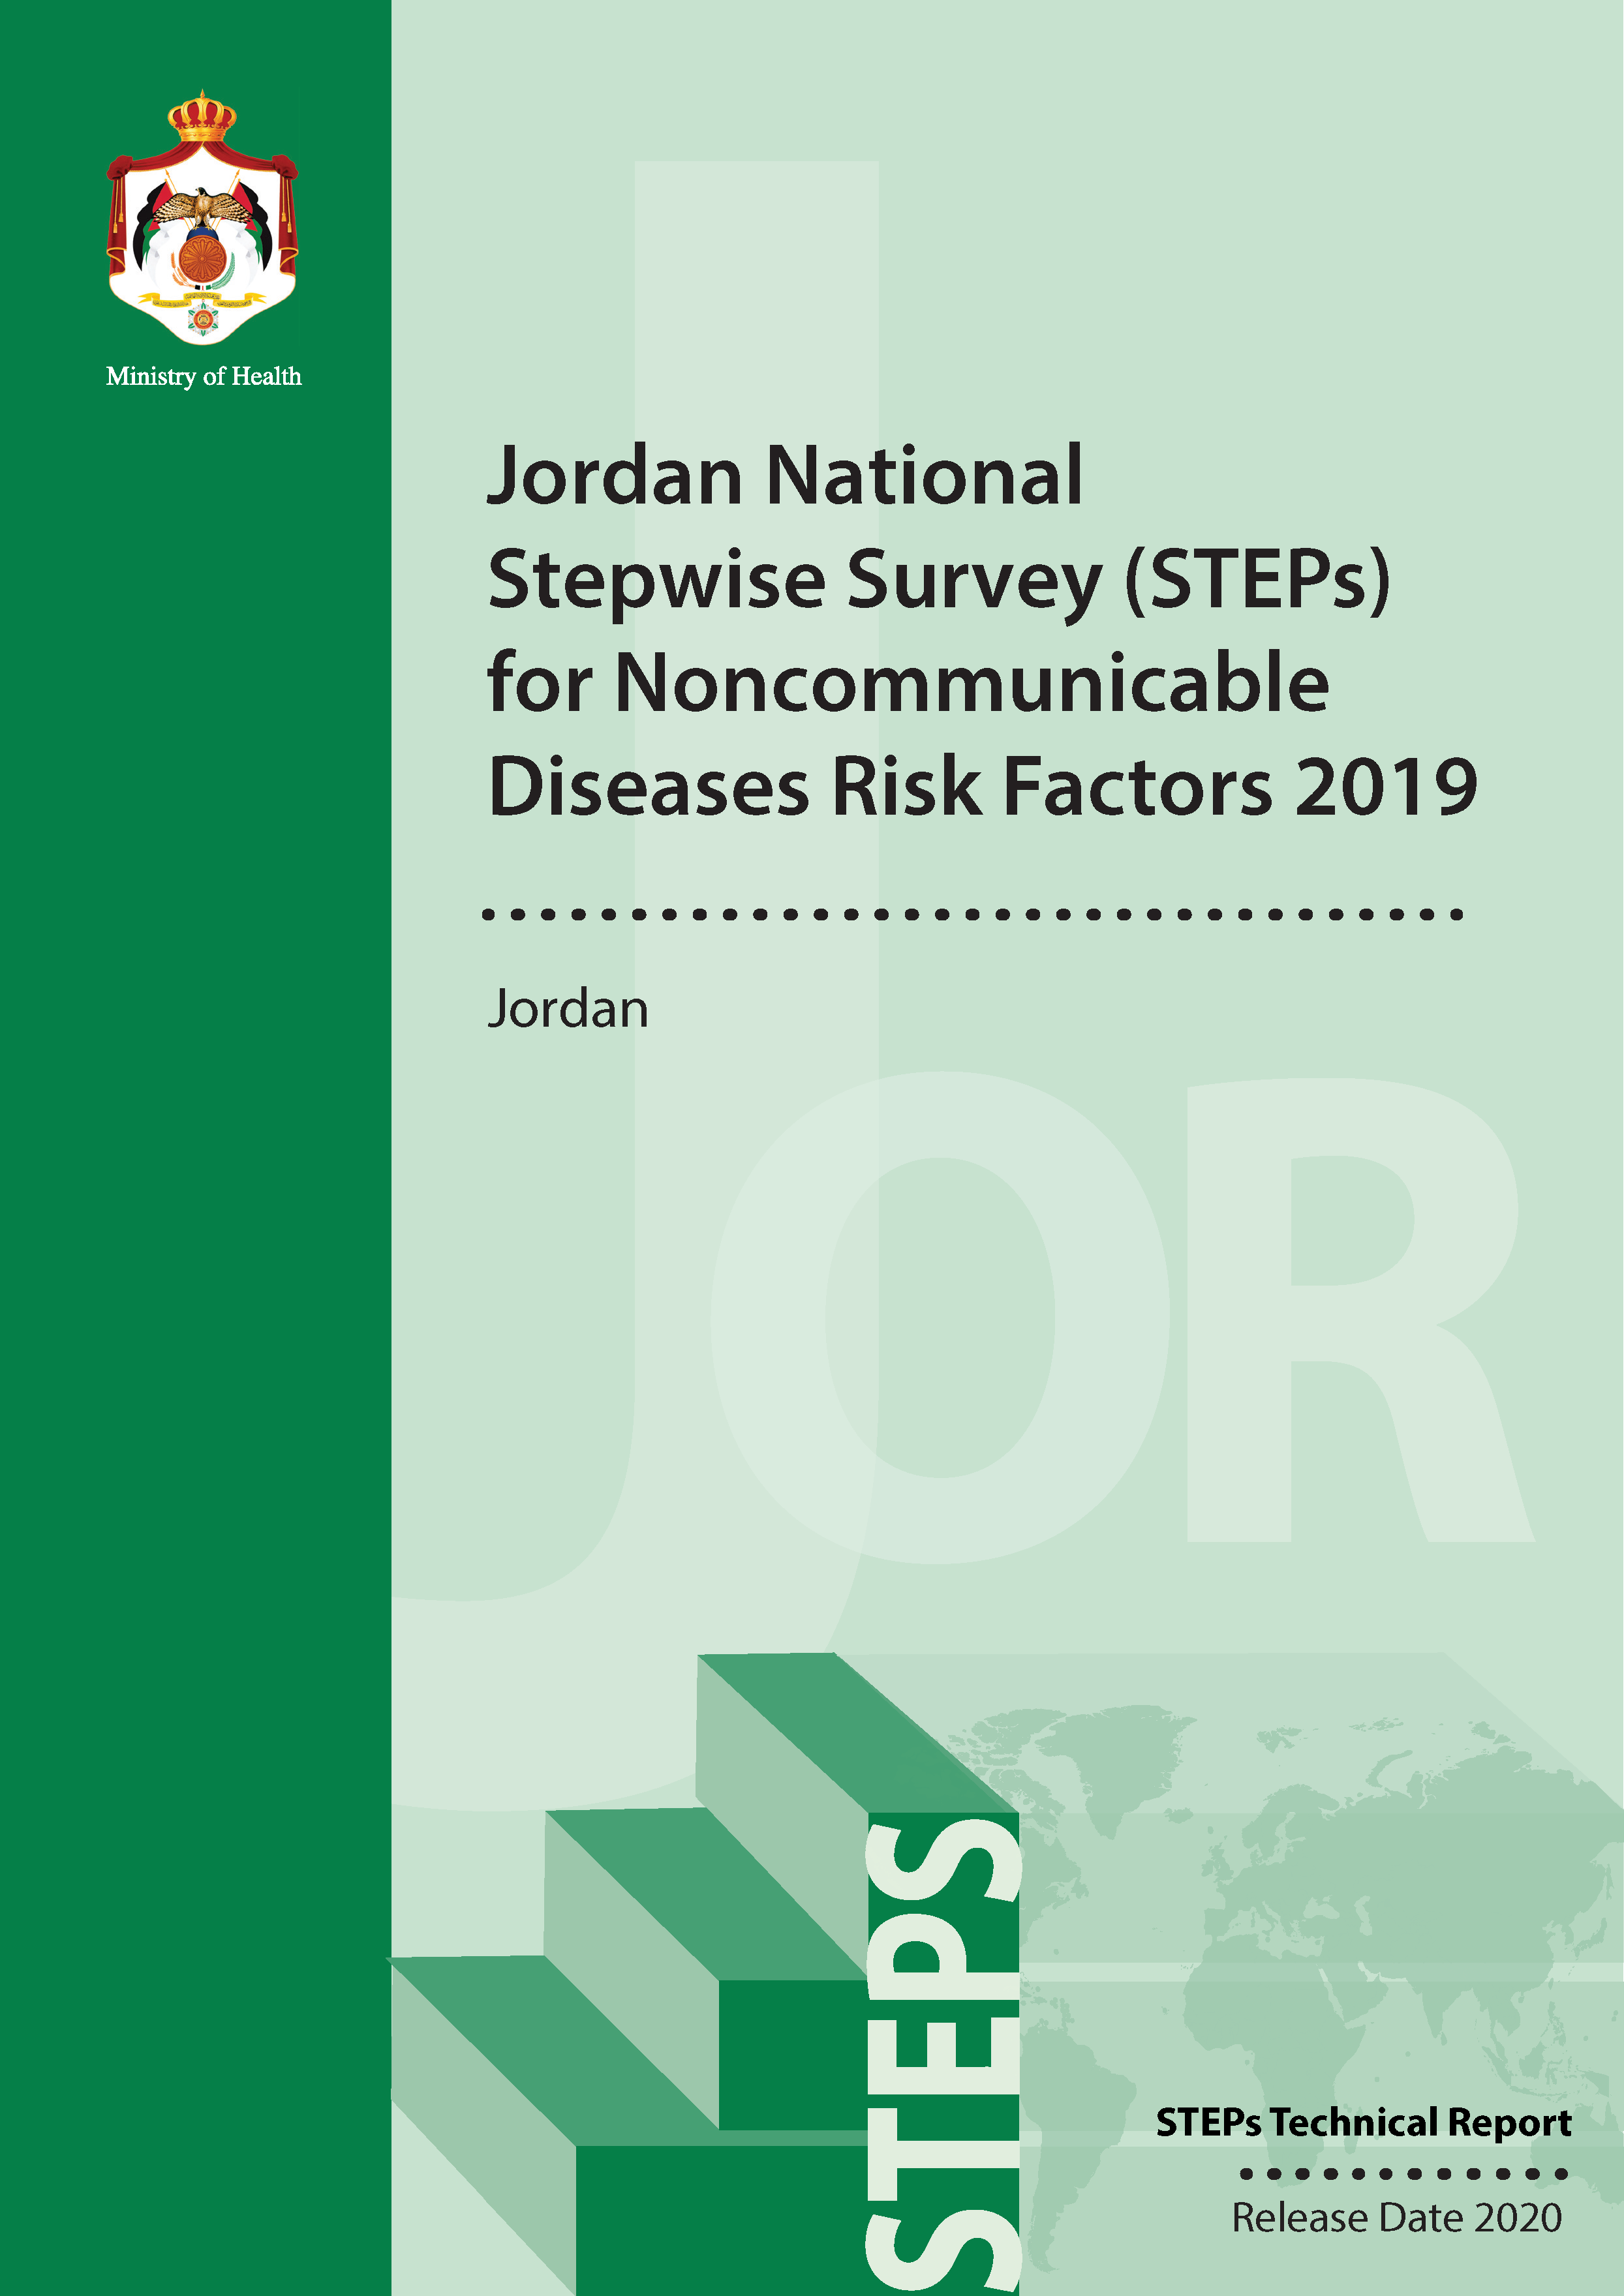 Results of Jordan National STEPwise Survey (STEPs) of noncommunicable diseases and their risk factors 2019